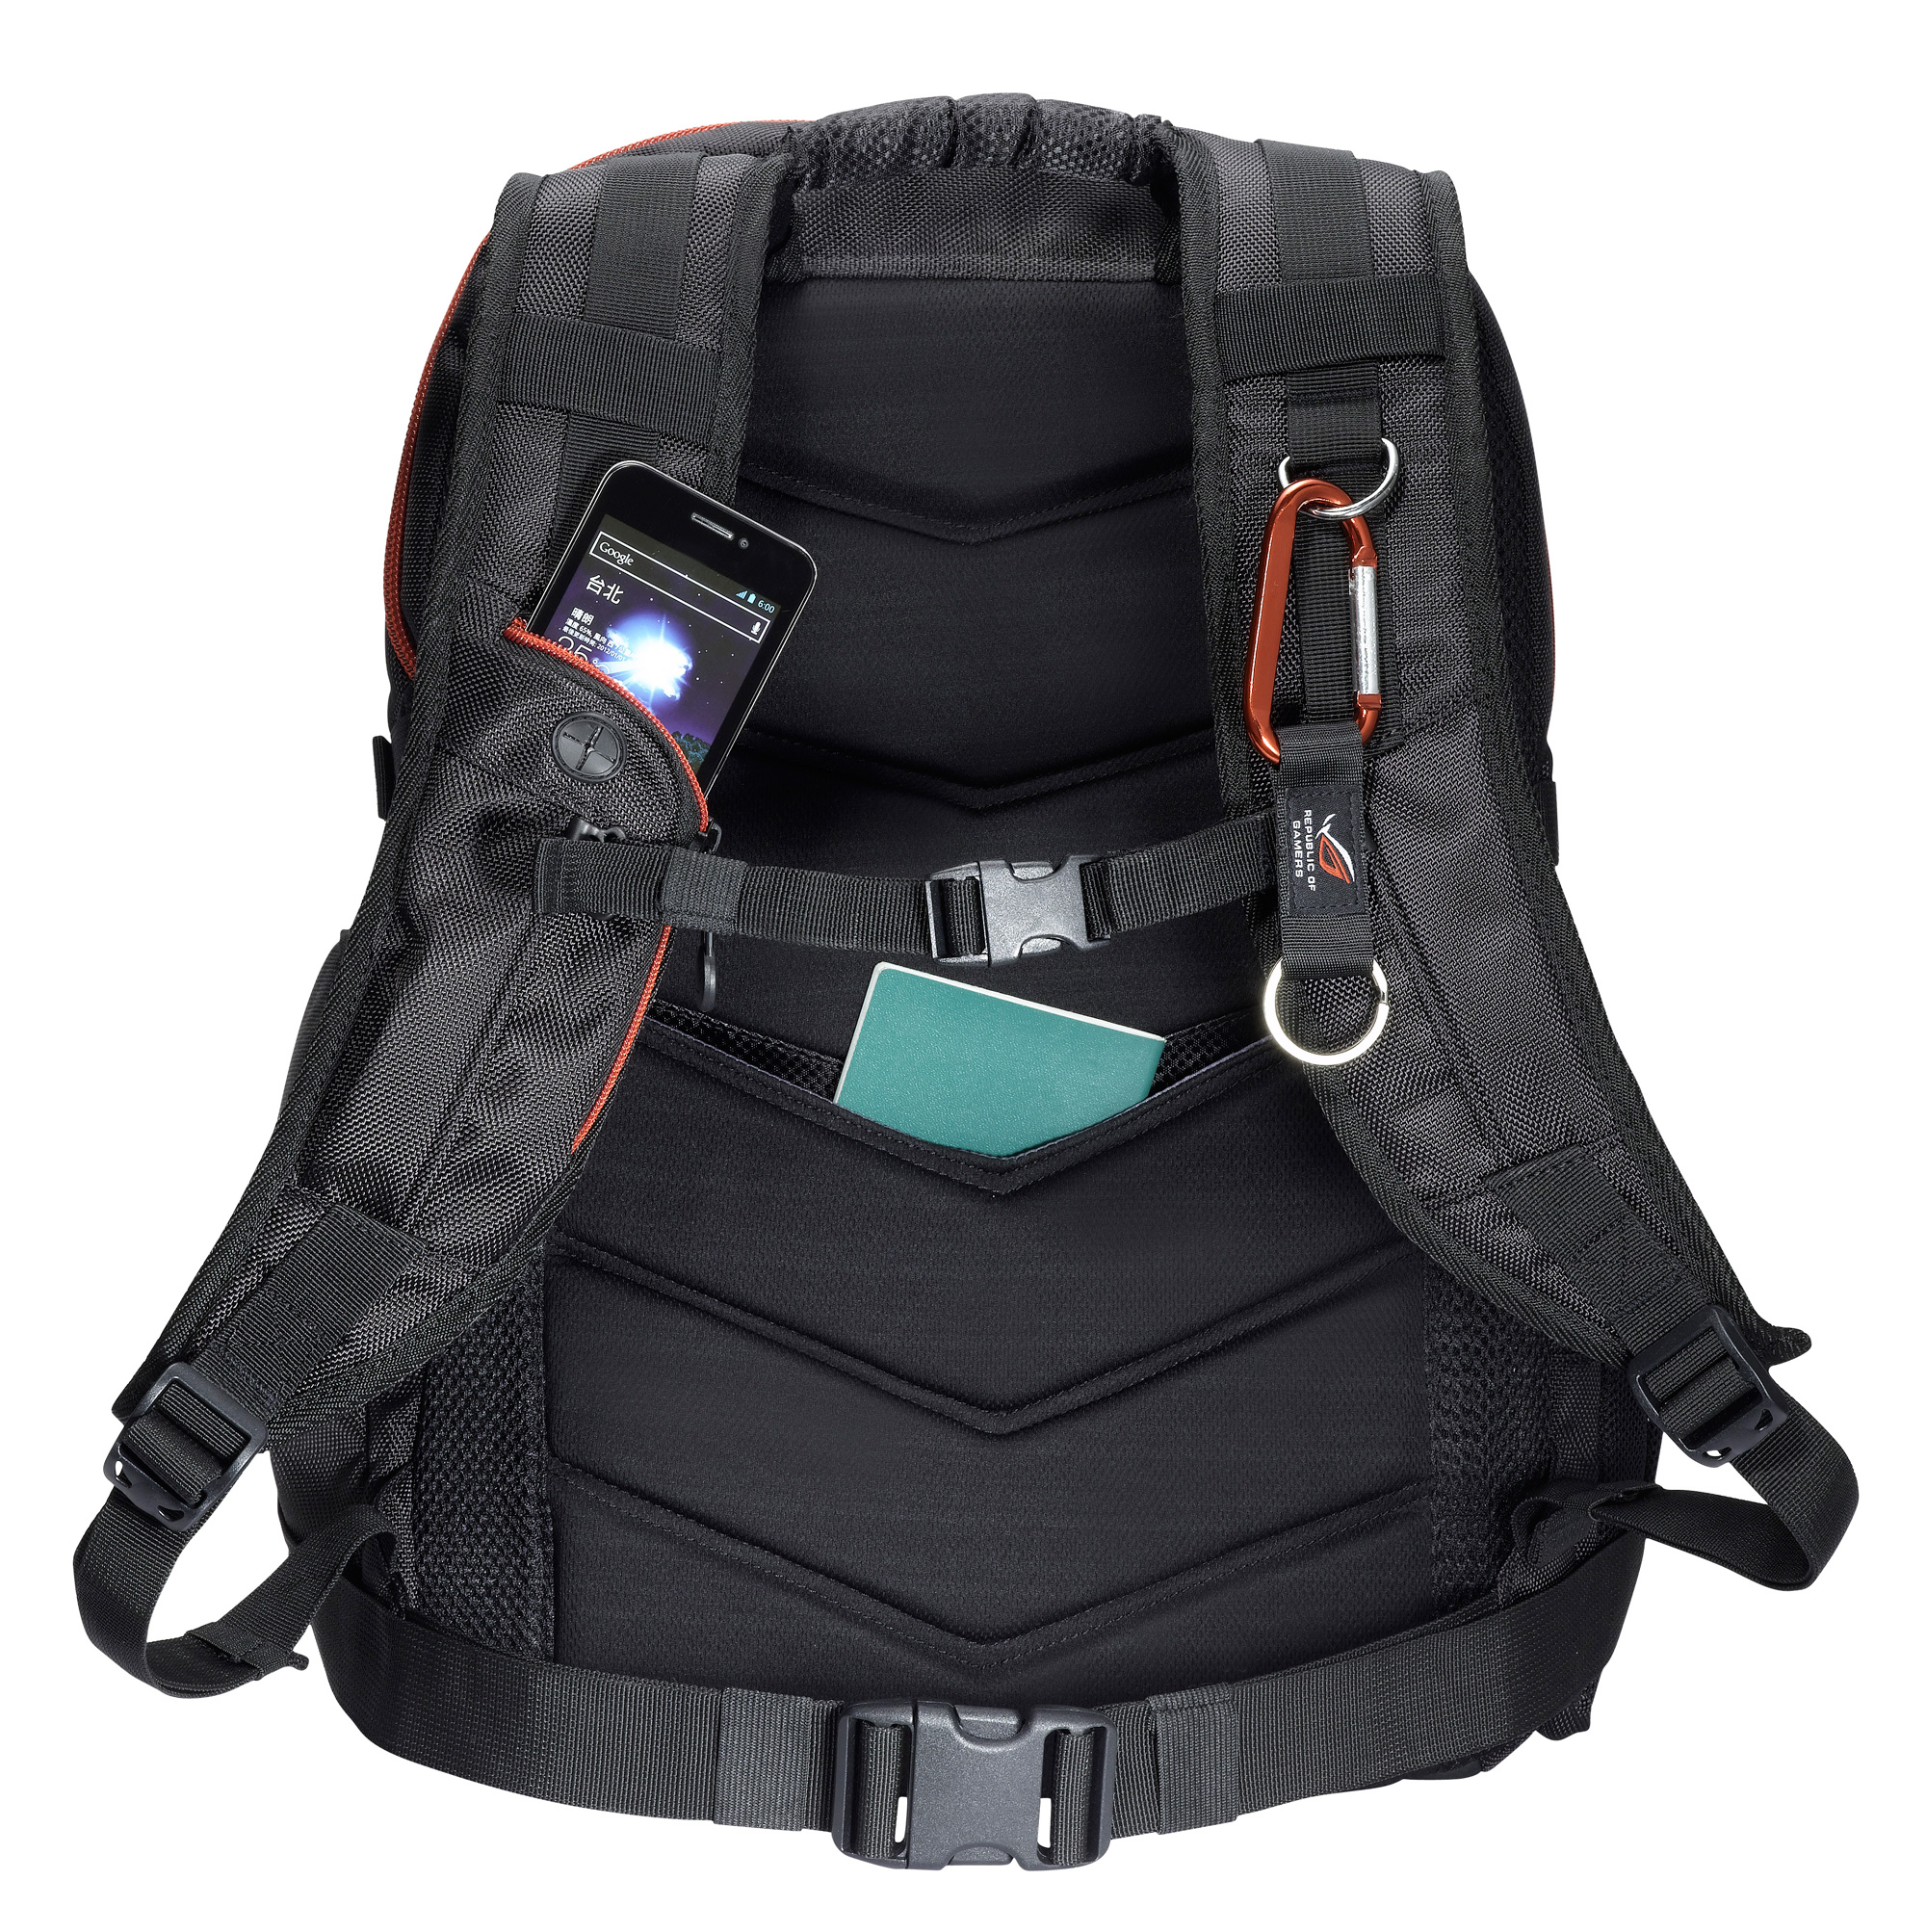 ASUS ROG Nomad Backpack Protects Your Gaming Laptop (Up to 17 Inches)